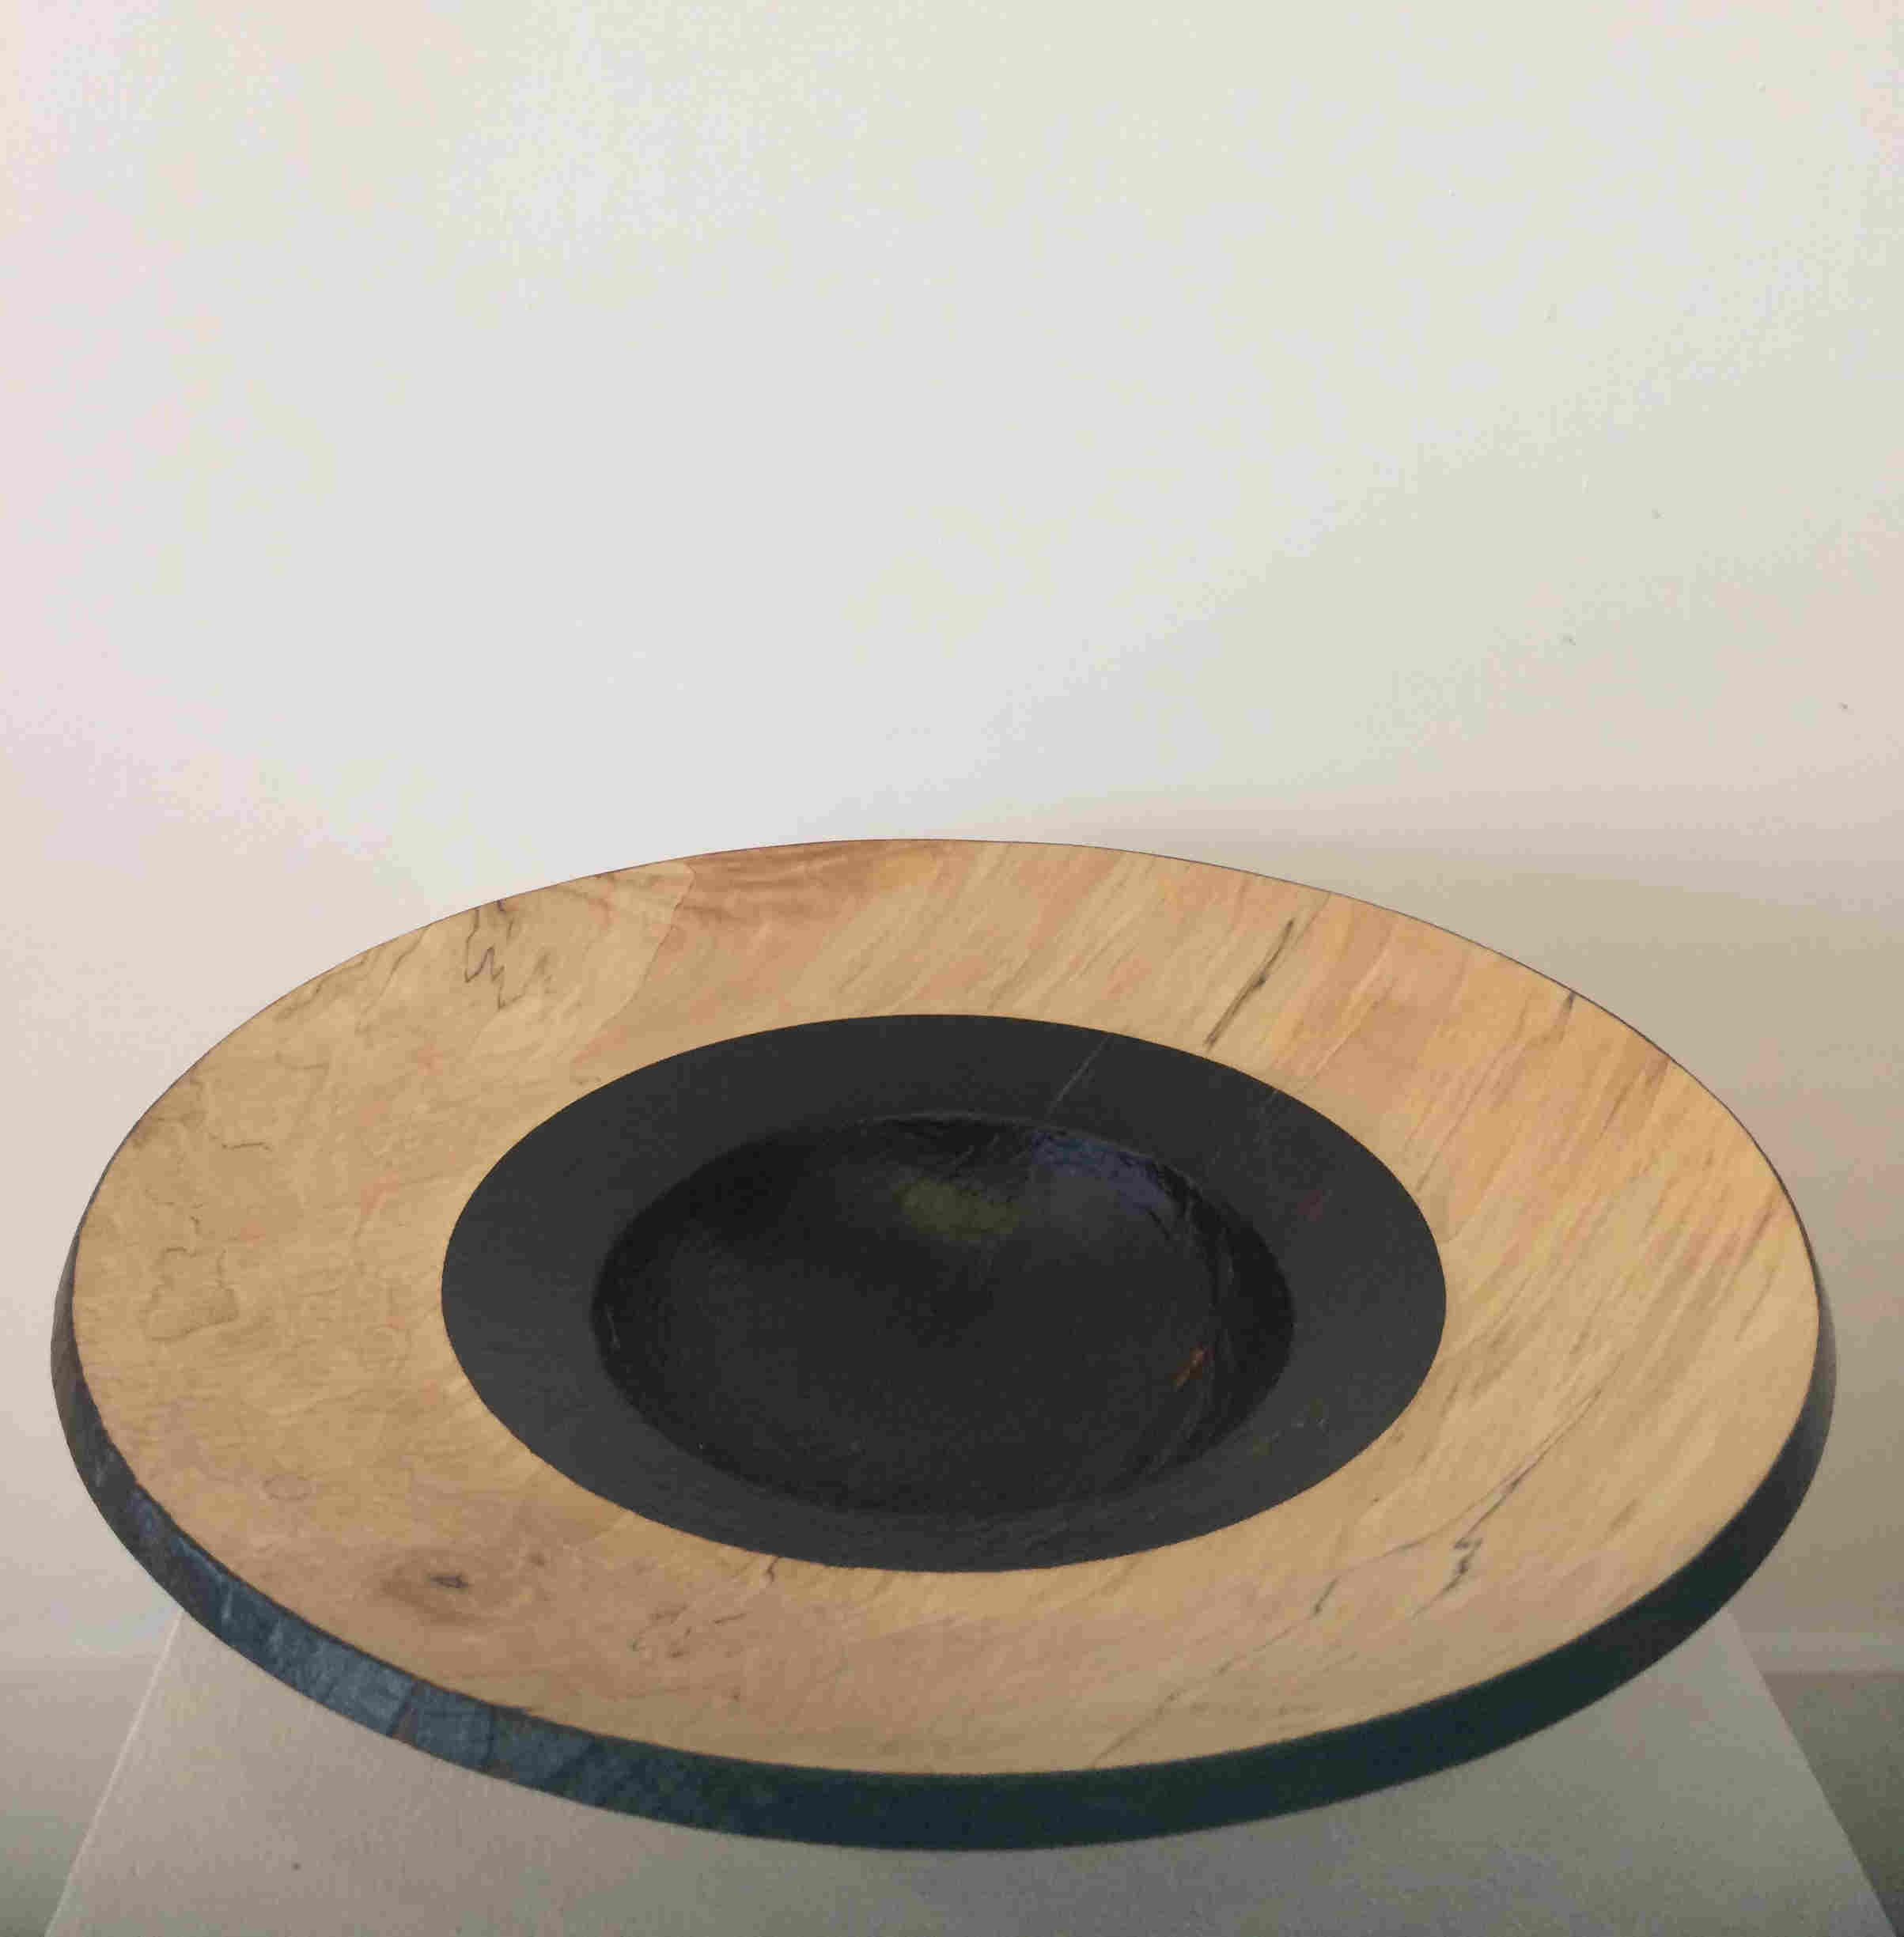 'Spalted Sycamore Bowl' by artist Angus Clyne